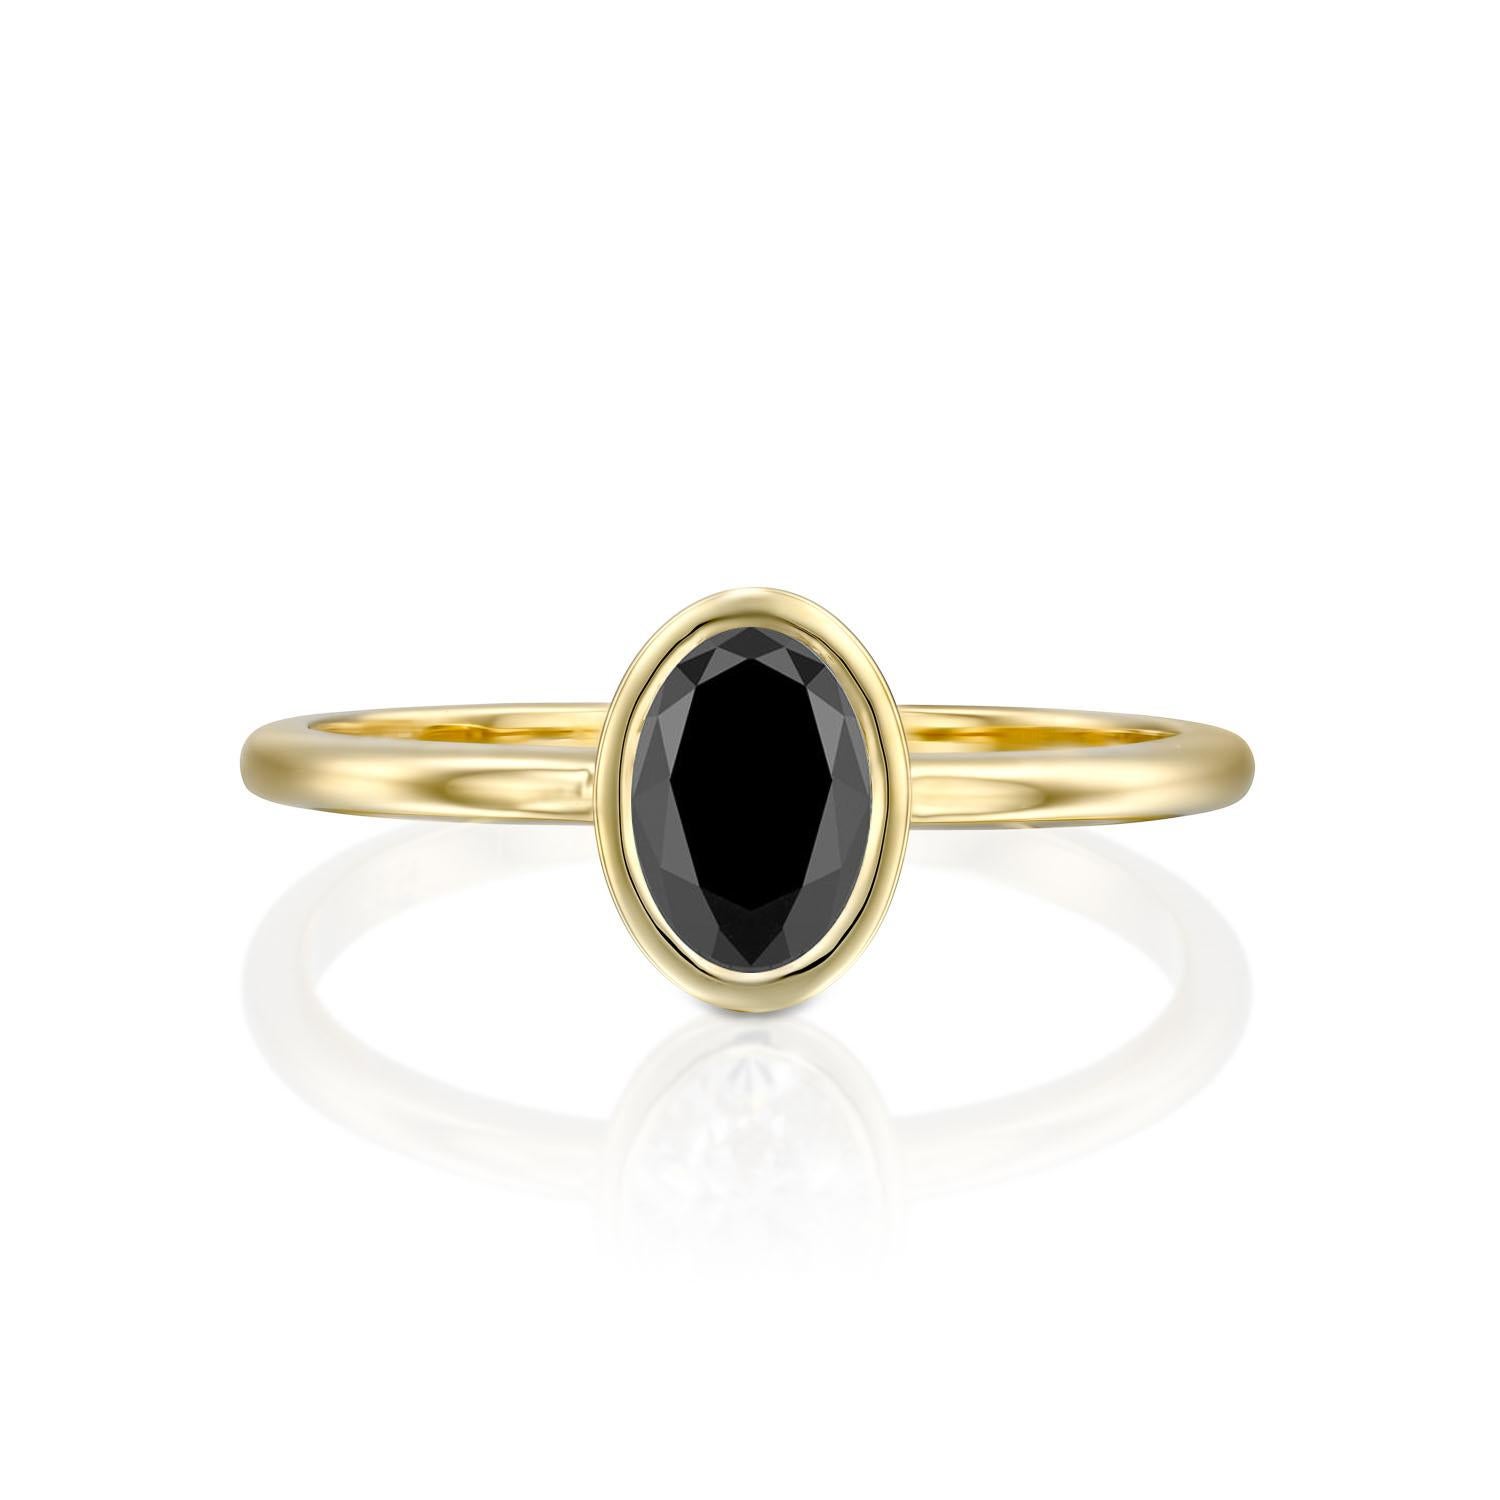 Beautiful minimalistic style black diamond engagement ring ring. Center stone is of 1.5 carats, natural, oval shaped, AAA quality Black diamond. Set in a sleek, 14K yellow gold, solitaire ring with a bezel setting. The setting looks delicate but is